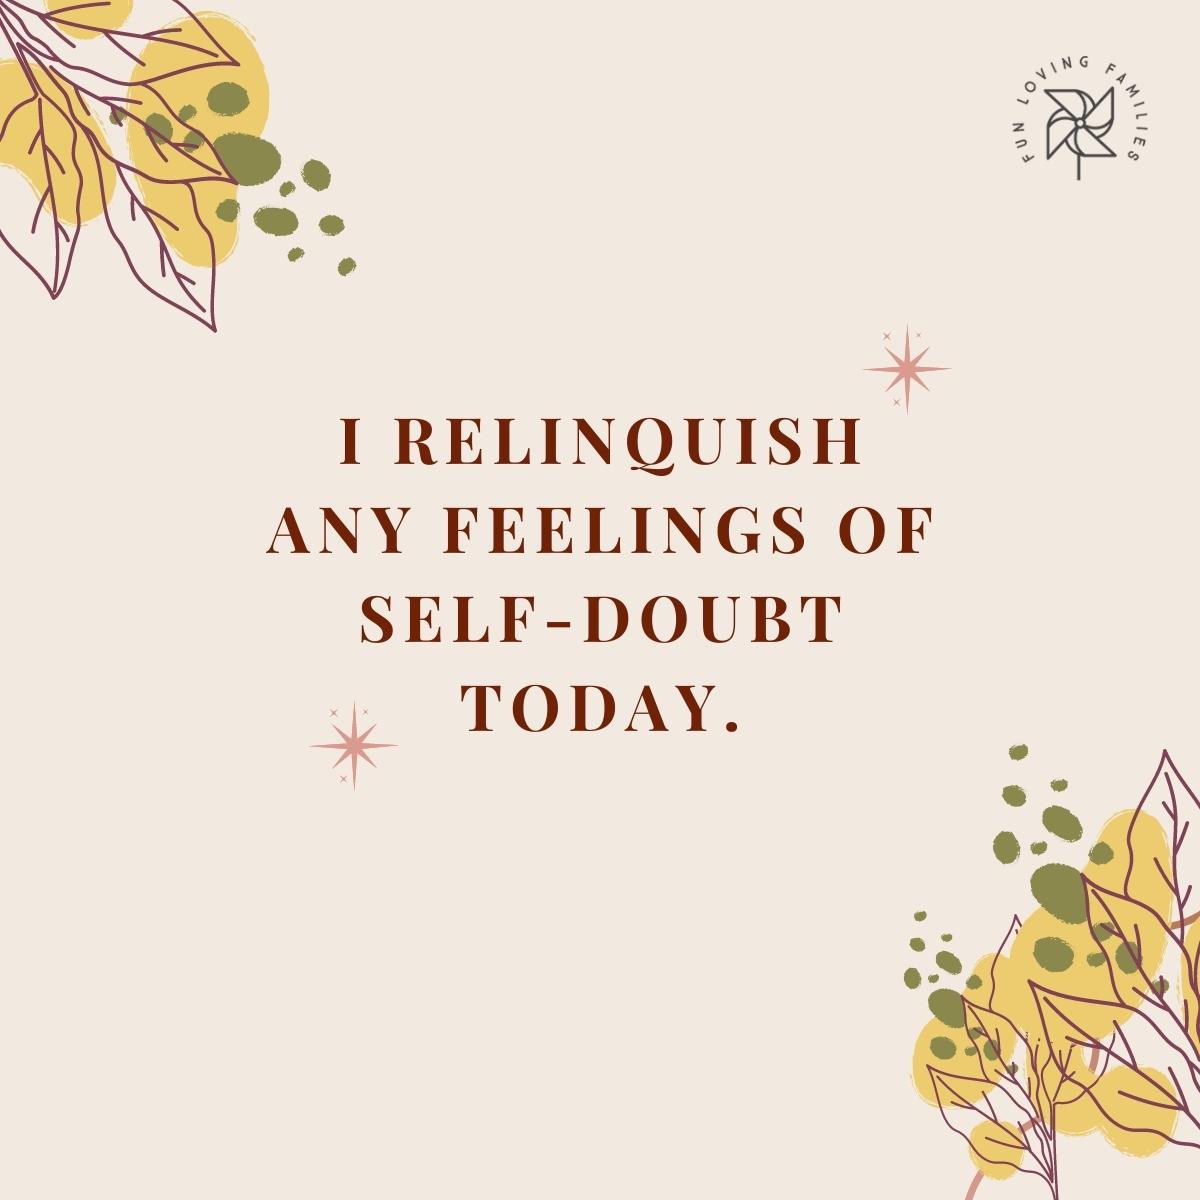 I relinquish any feelings of self-doubt today affirmation